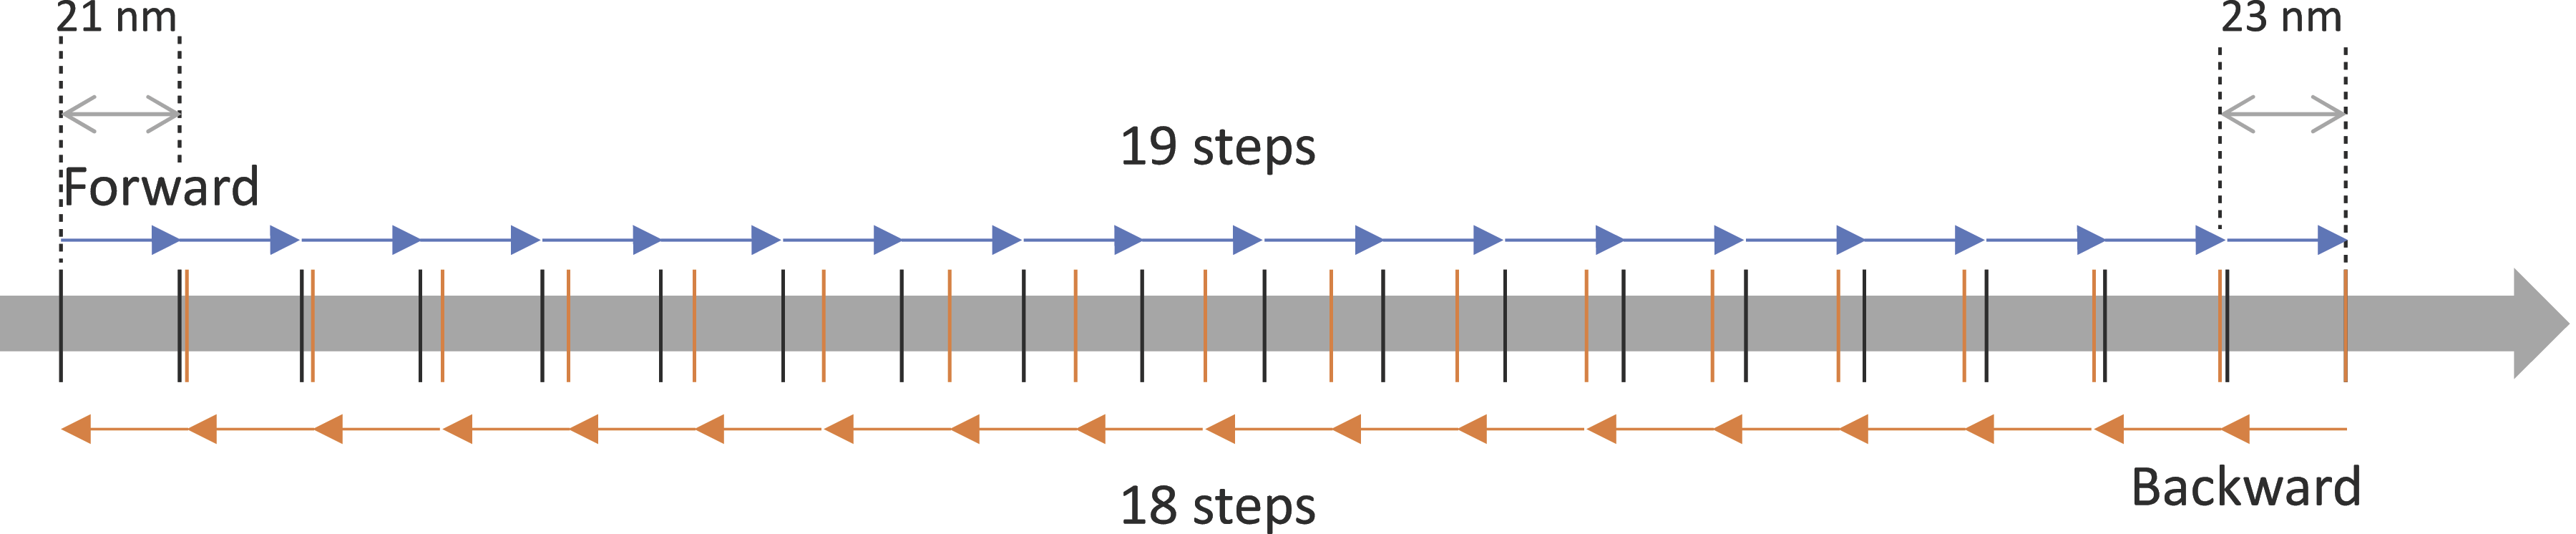 graph of The variation between forward and backwards step sizes in a Picomotor